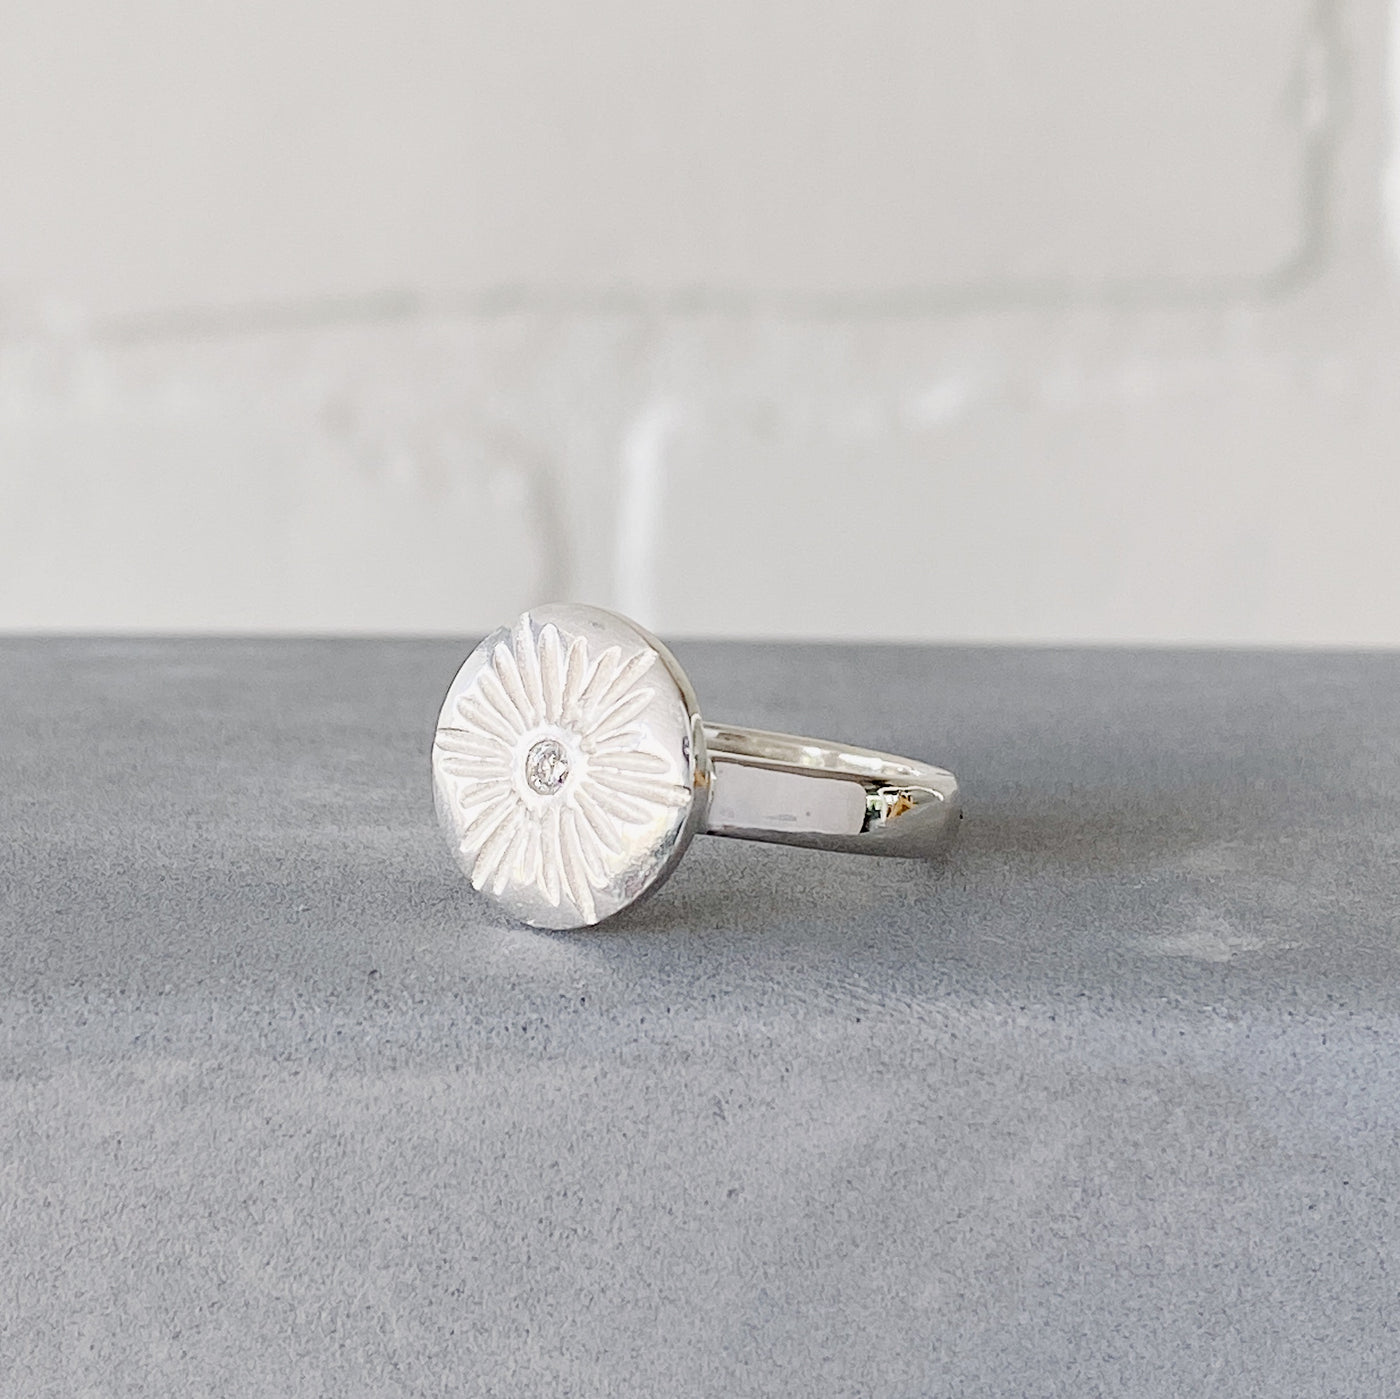 Large carved sunburst ring with a diamond center in sterling silver side view by Corey Egan